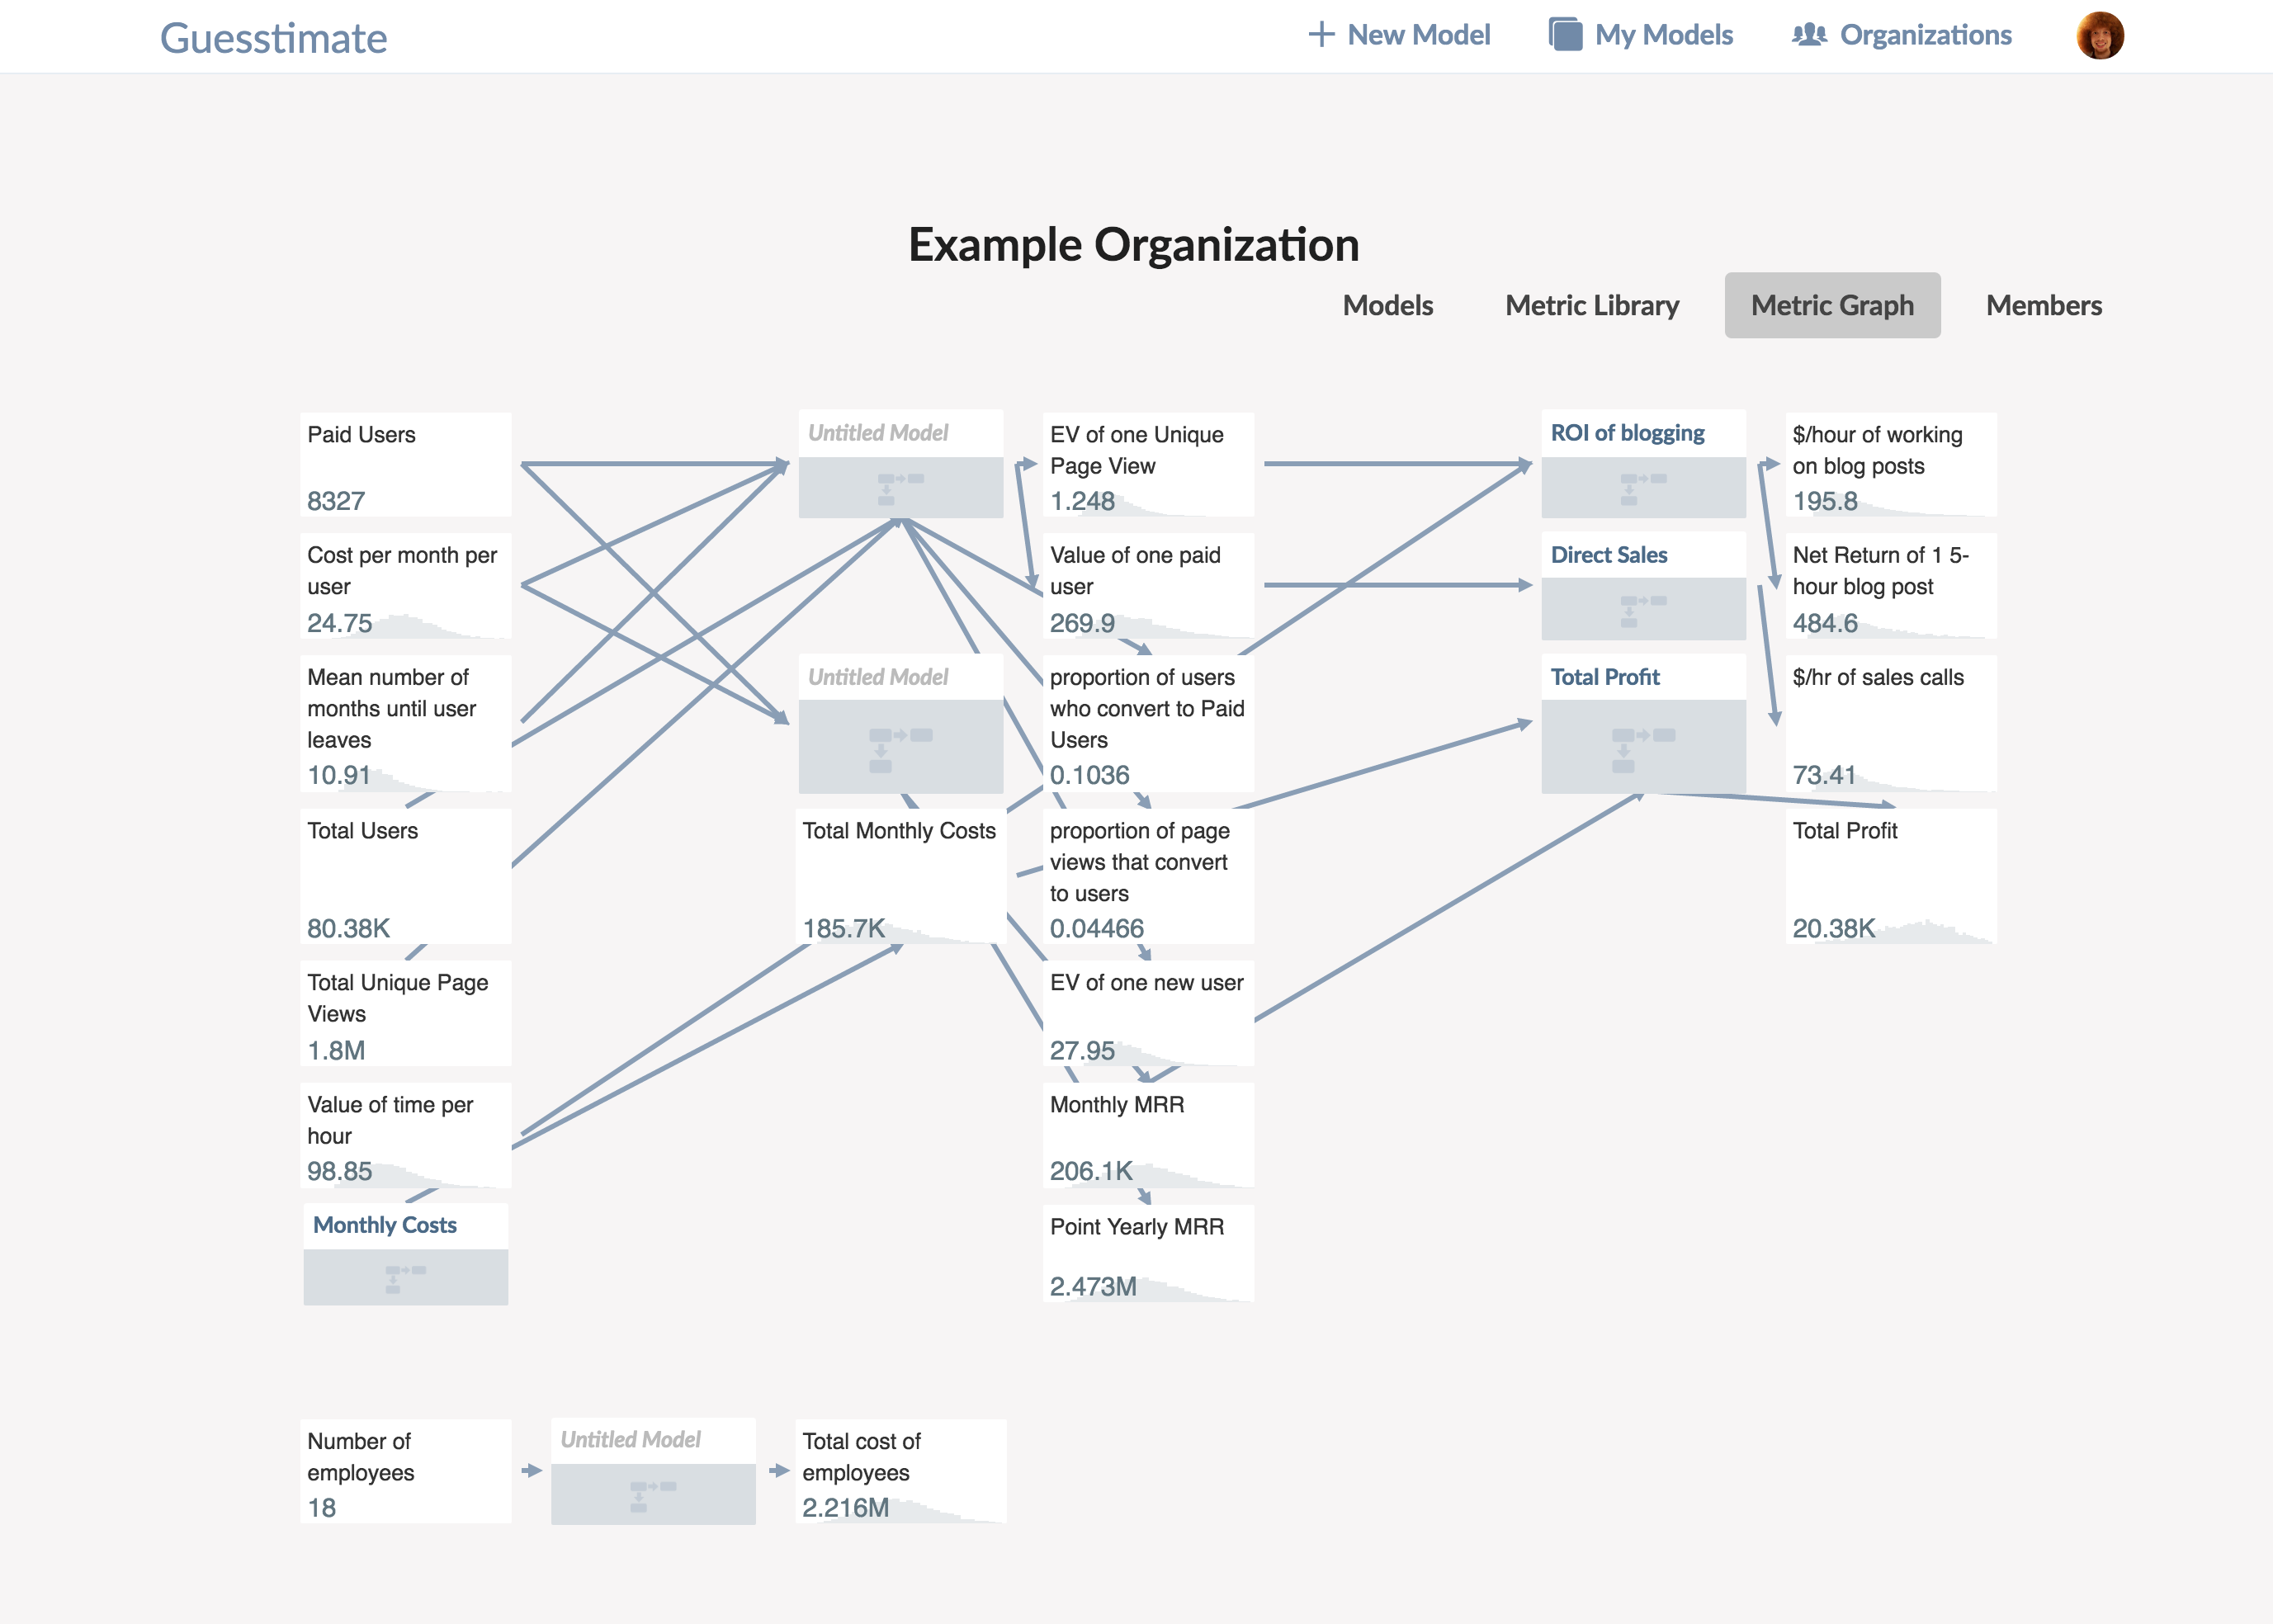 The metric graph displays the dependency network of your organization's facts.